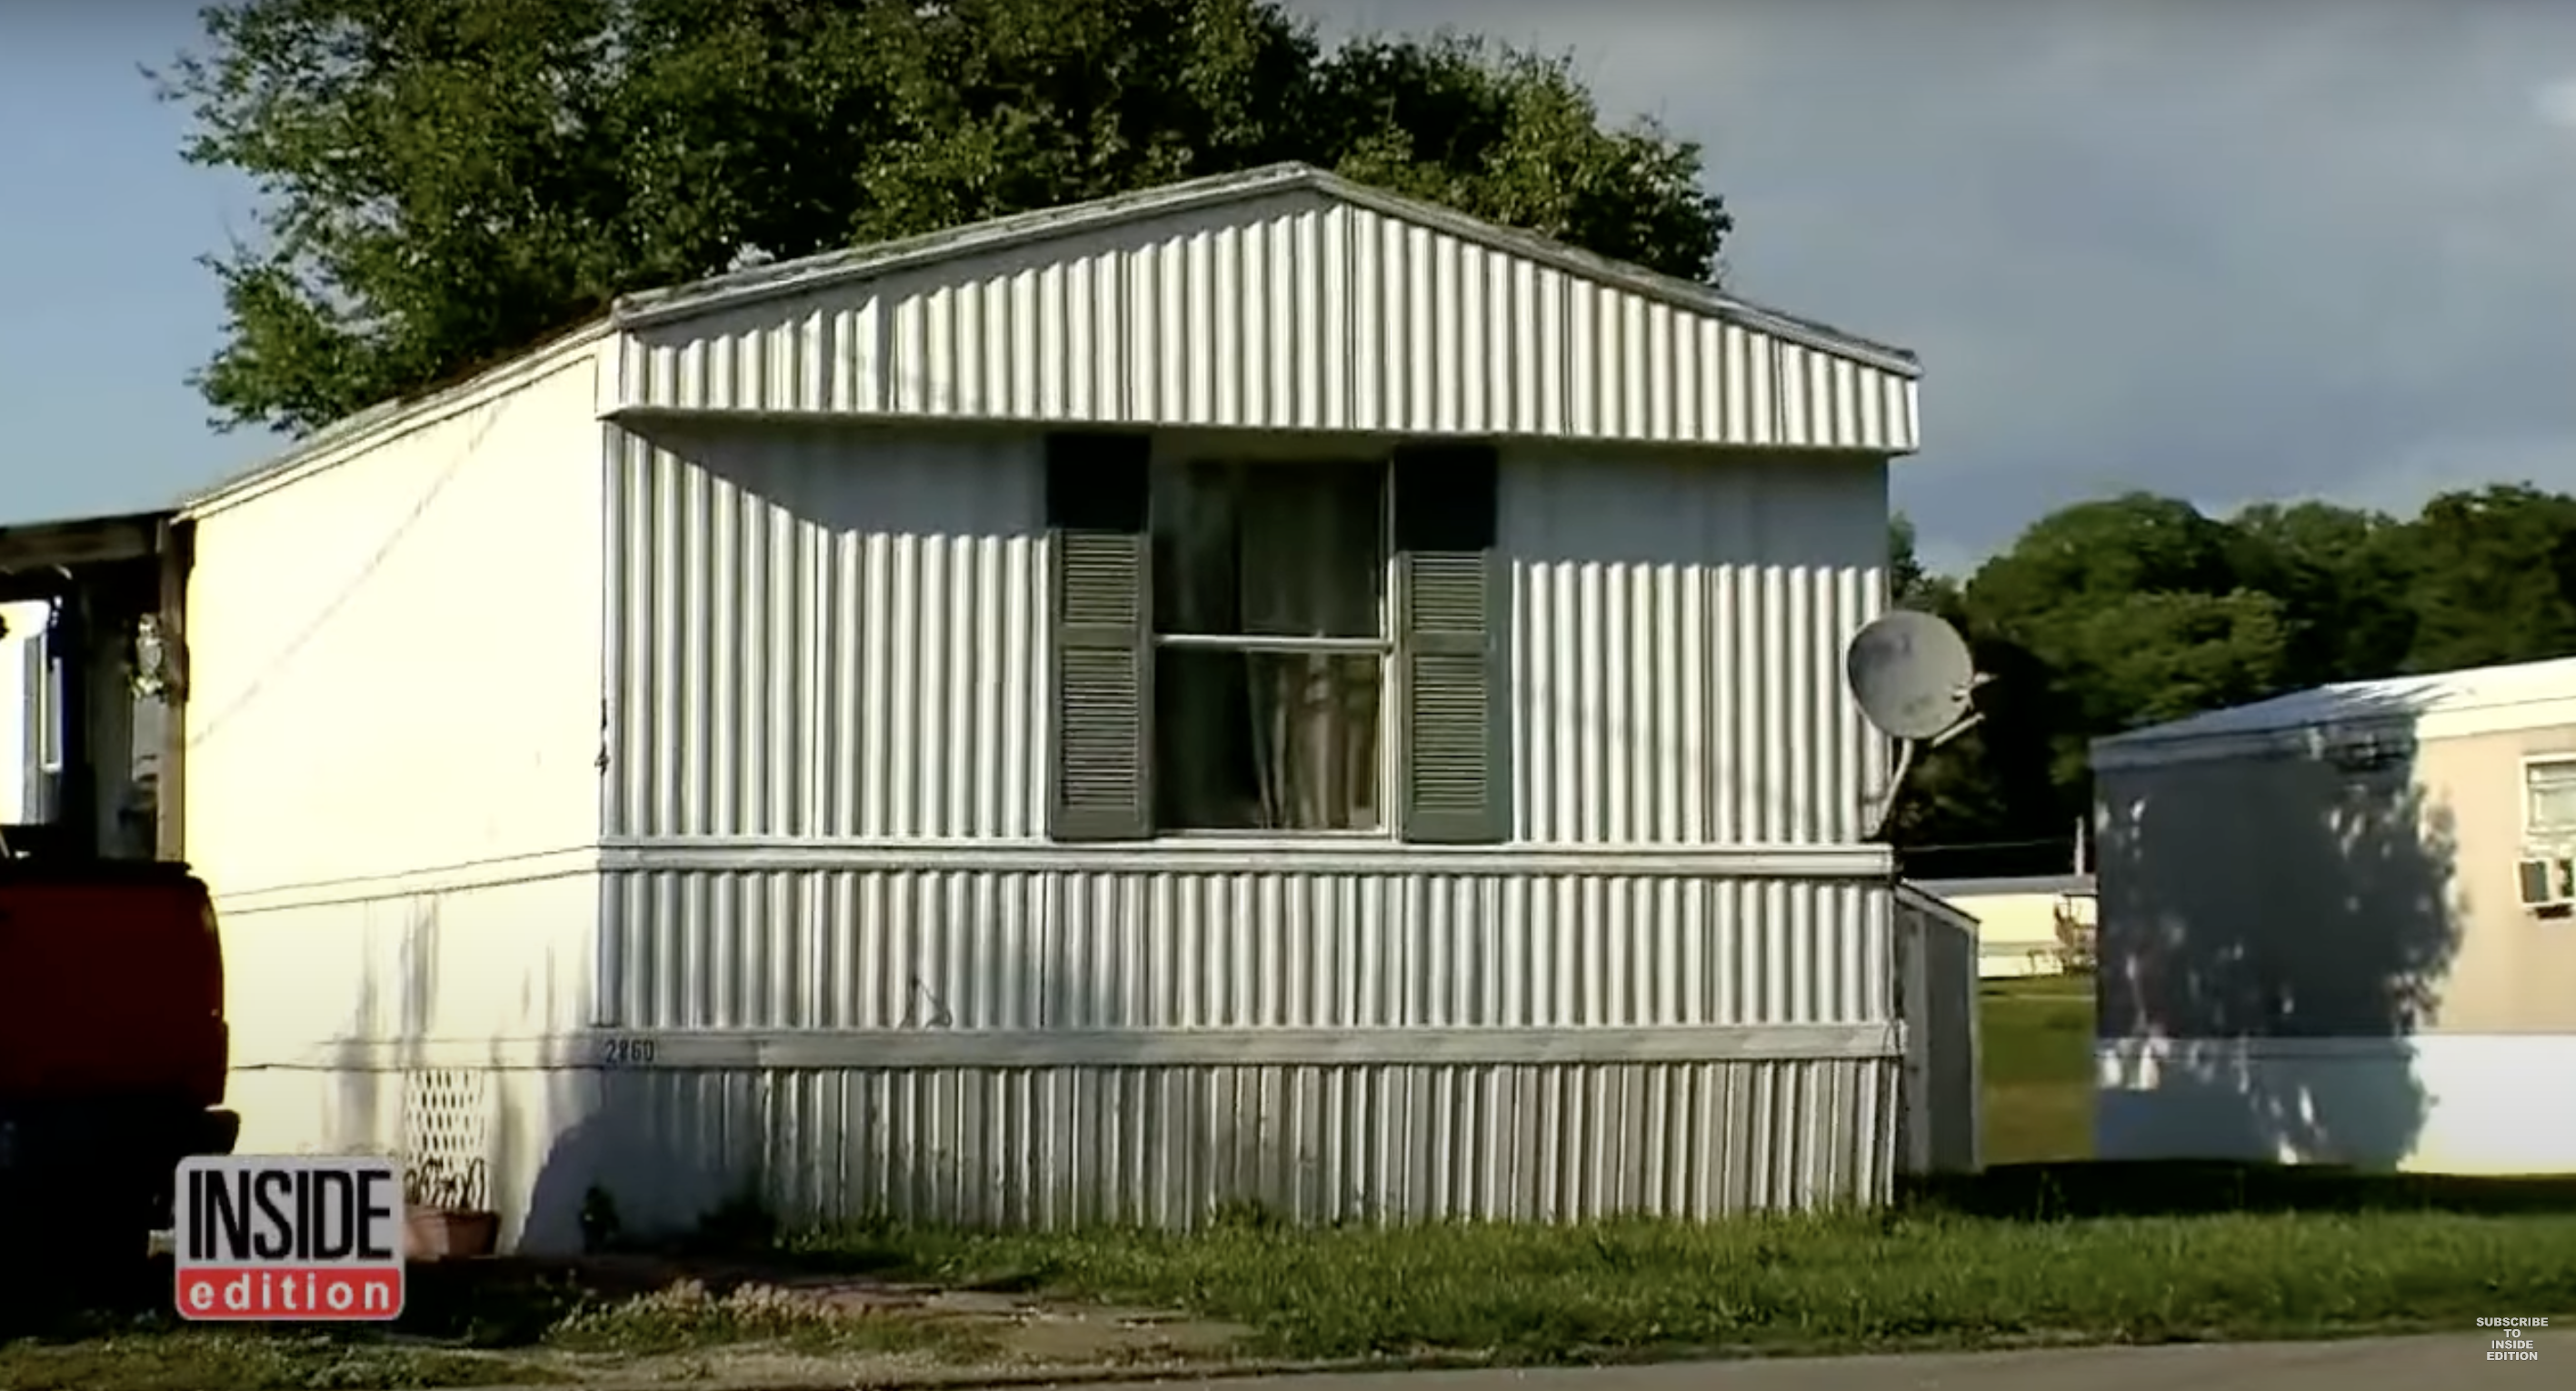 The trailer in Southern Indiana where Erin Moran lived in her final months | Source: Youtube.com/Inside Edition